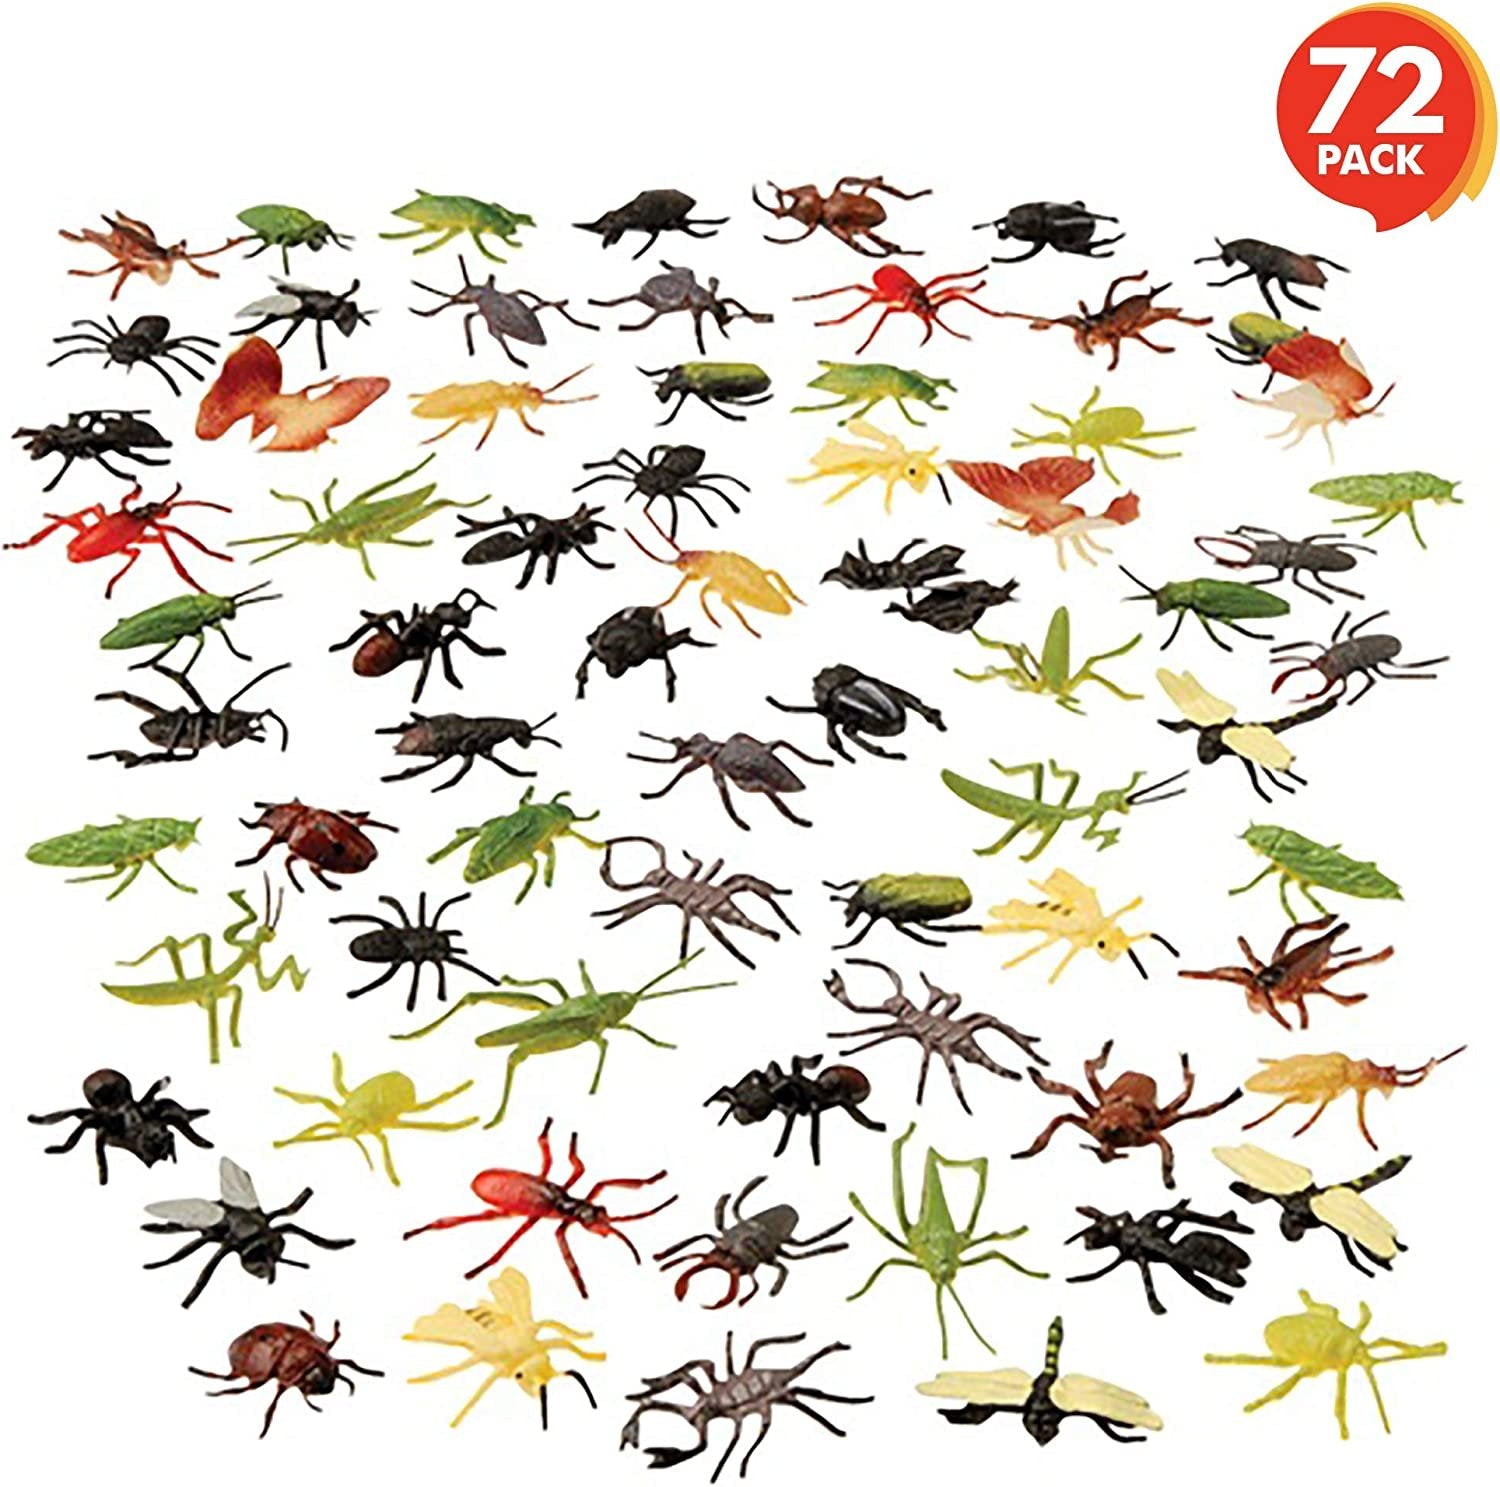 Insect Figurines Toys Set - 72 Pack - Assorted Plastic Bug Animal Figures for Kids - Fun Learning Aid, Birthday Party Favors, Cake Toppers, Prank Gag Toys, Goody Bag Fillers, Gift Idea